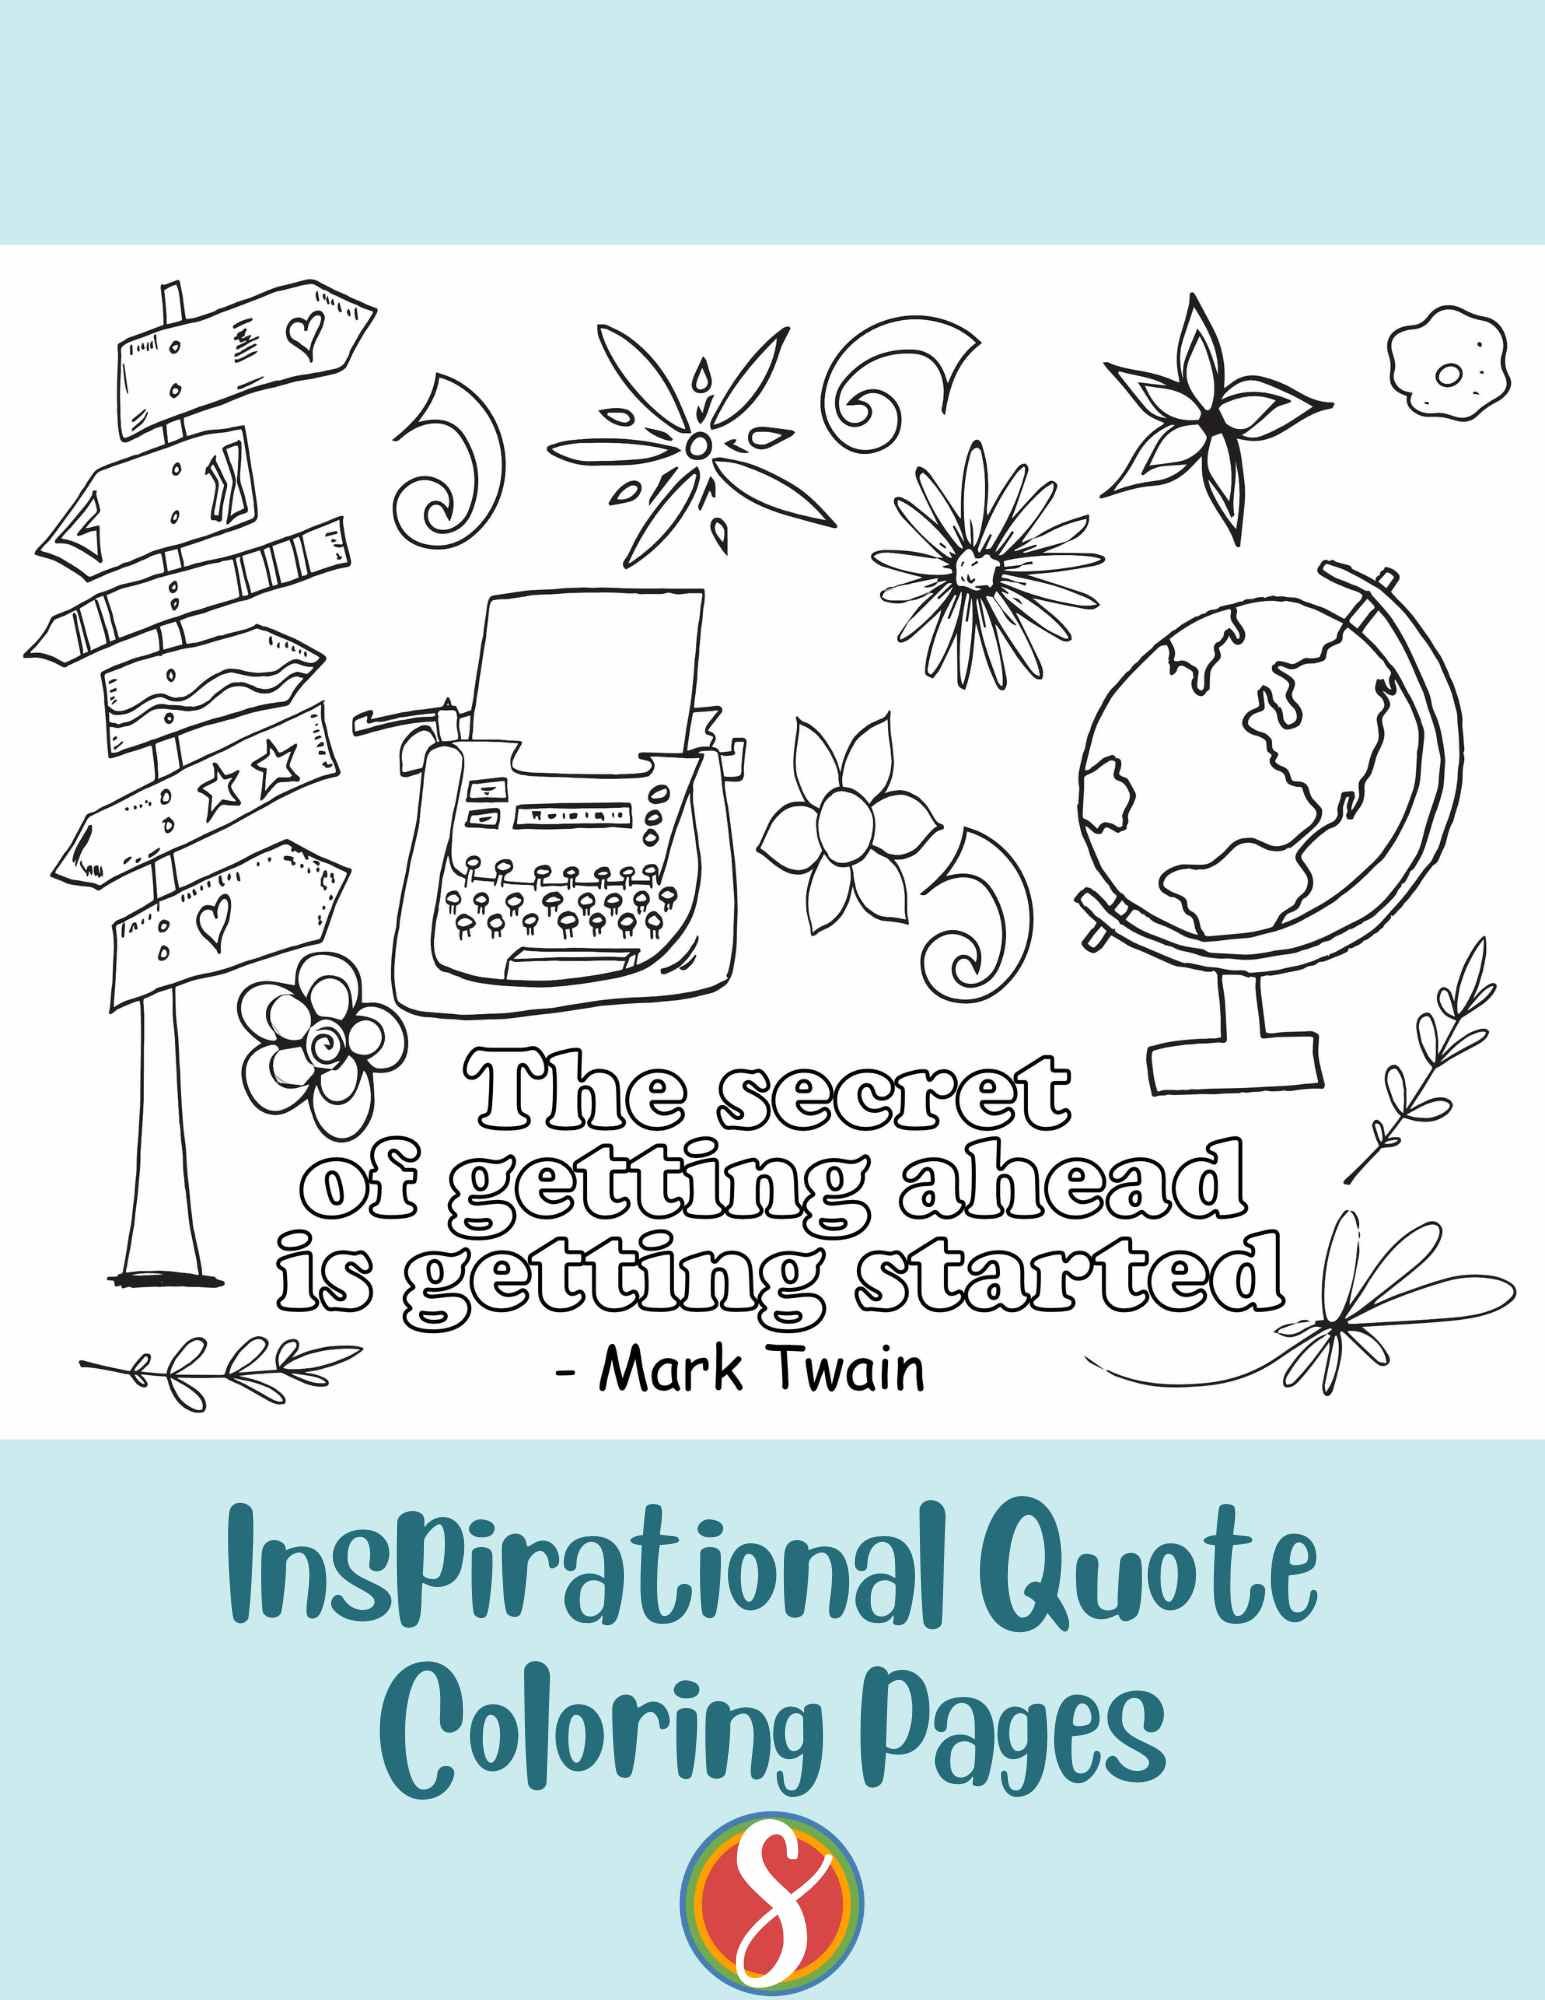 images to color - sign post, typewriter, globe, assorted flowers + colorable text "the secret of getting ahead is getting started" Mark Twain